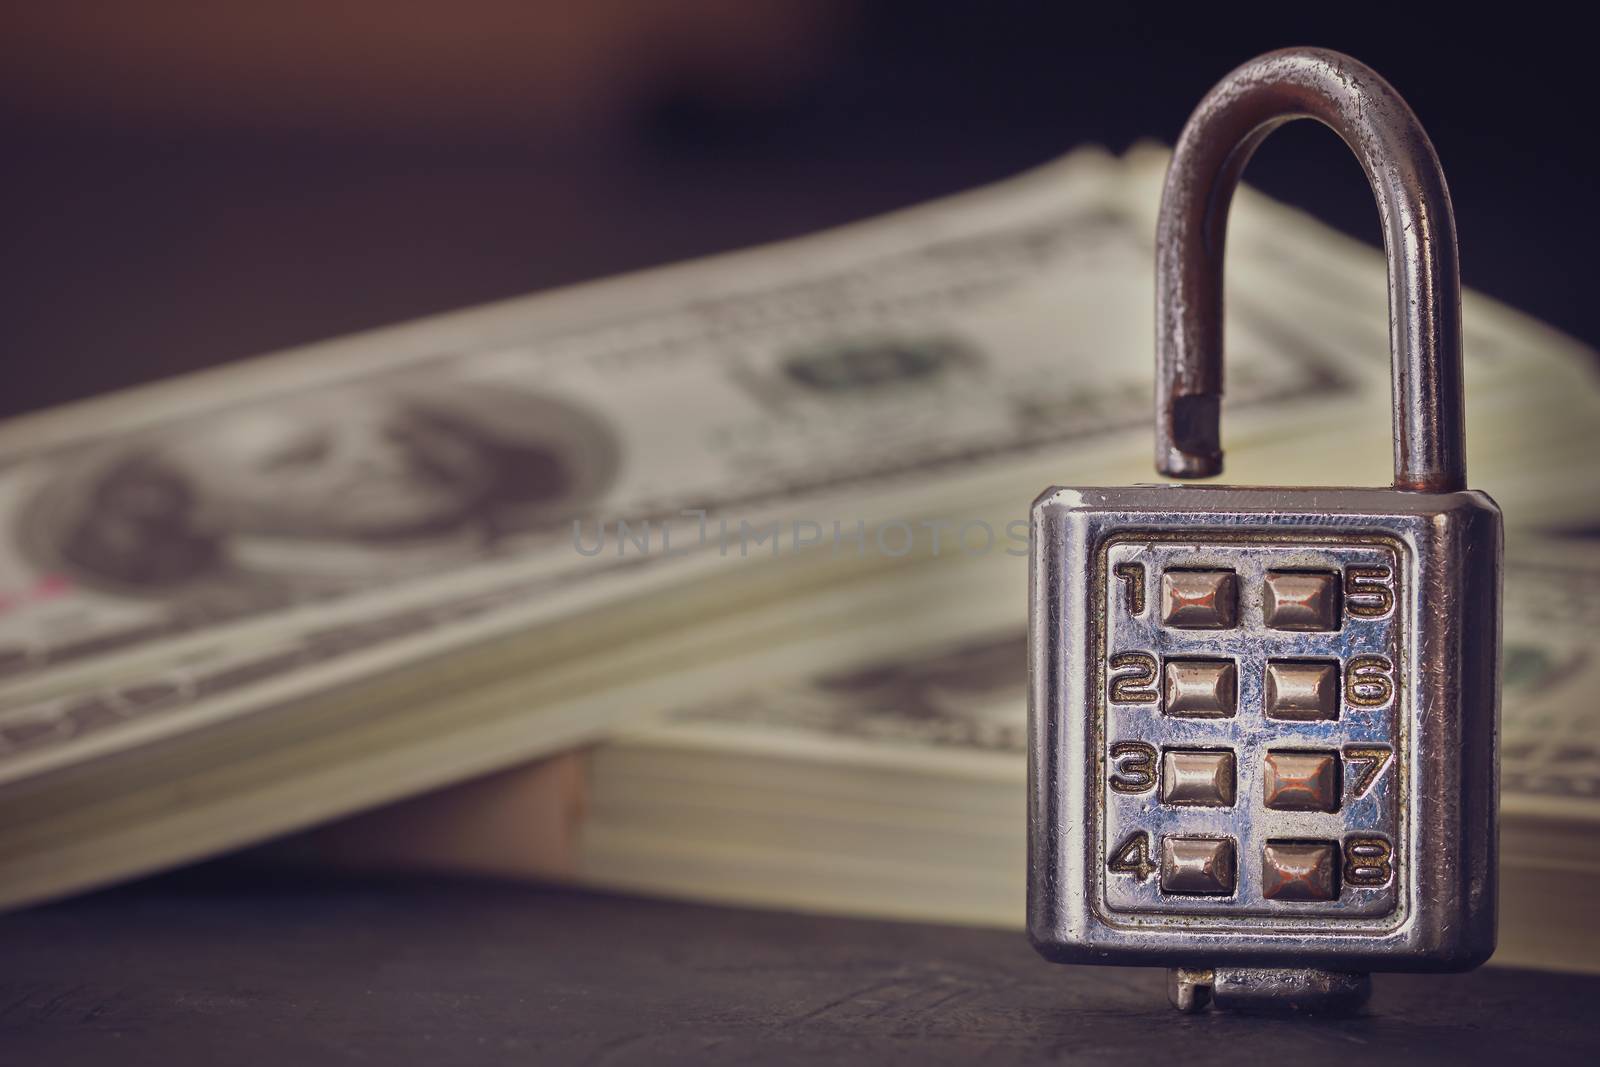 Combination padlock and dollar banknote in darkness. Concept of business secrets or financial security.